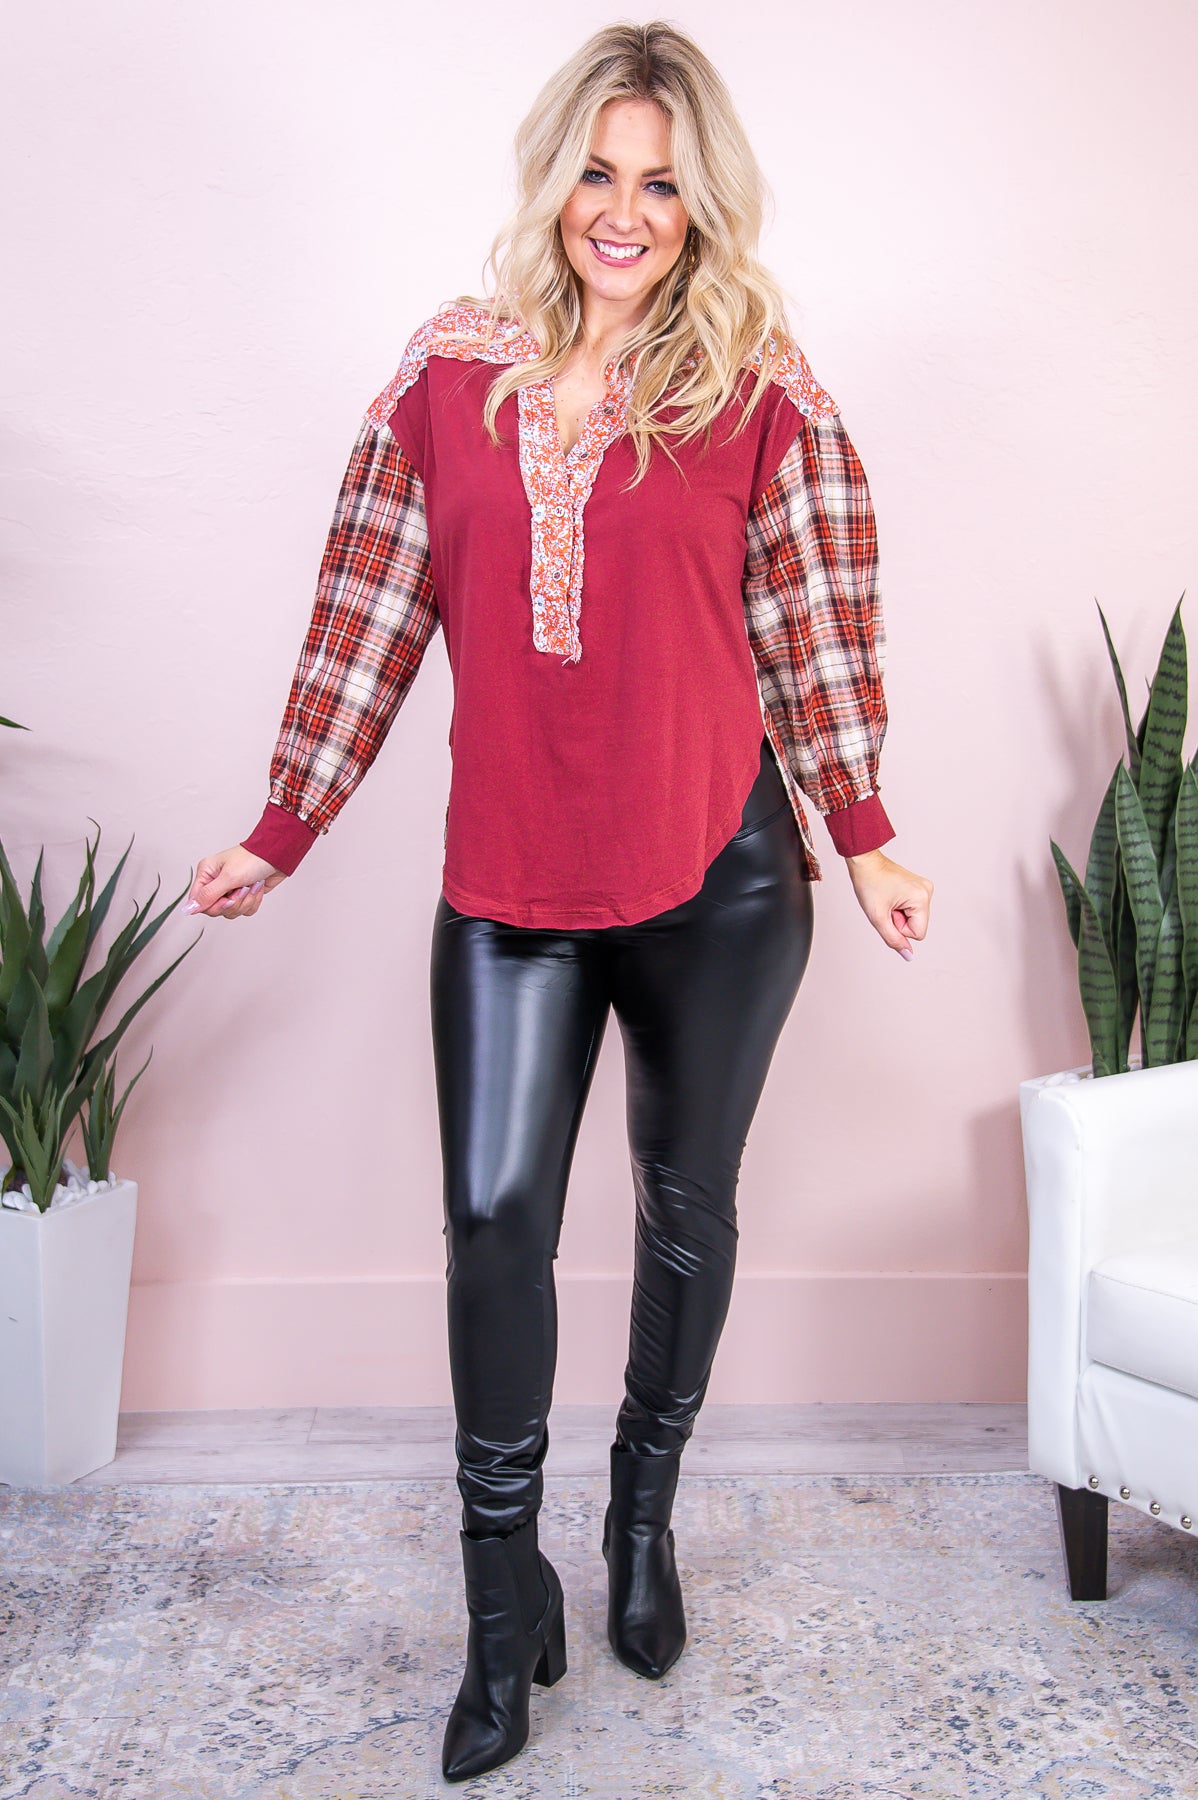 Own Your Moment Red/Multi Color Floral/Plaid Top - T8065RD